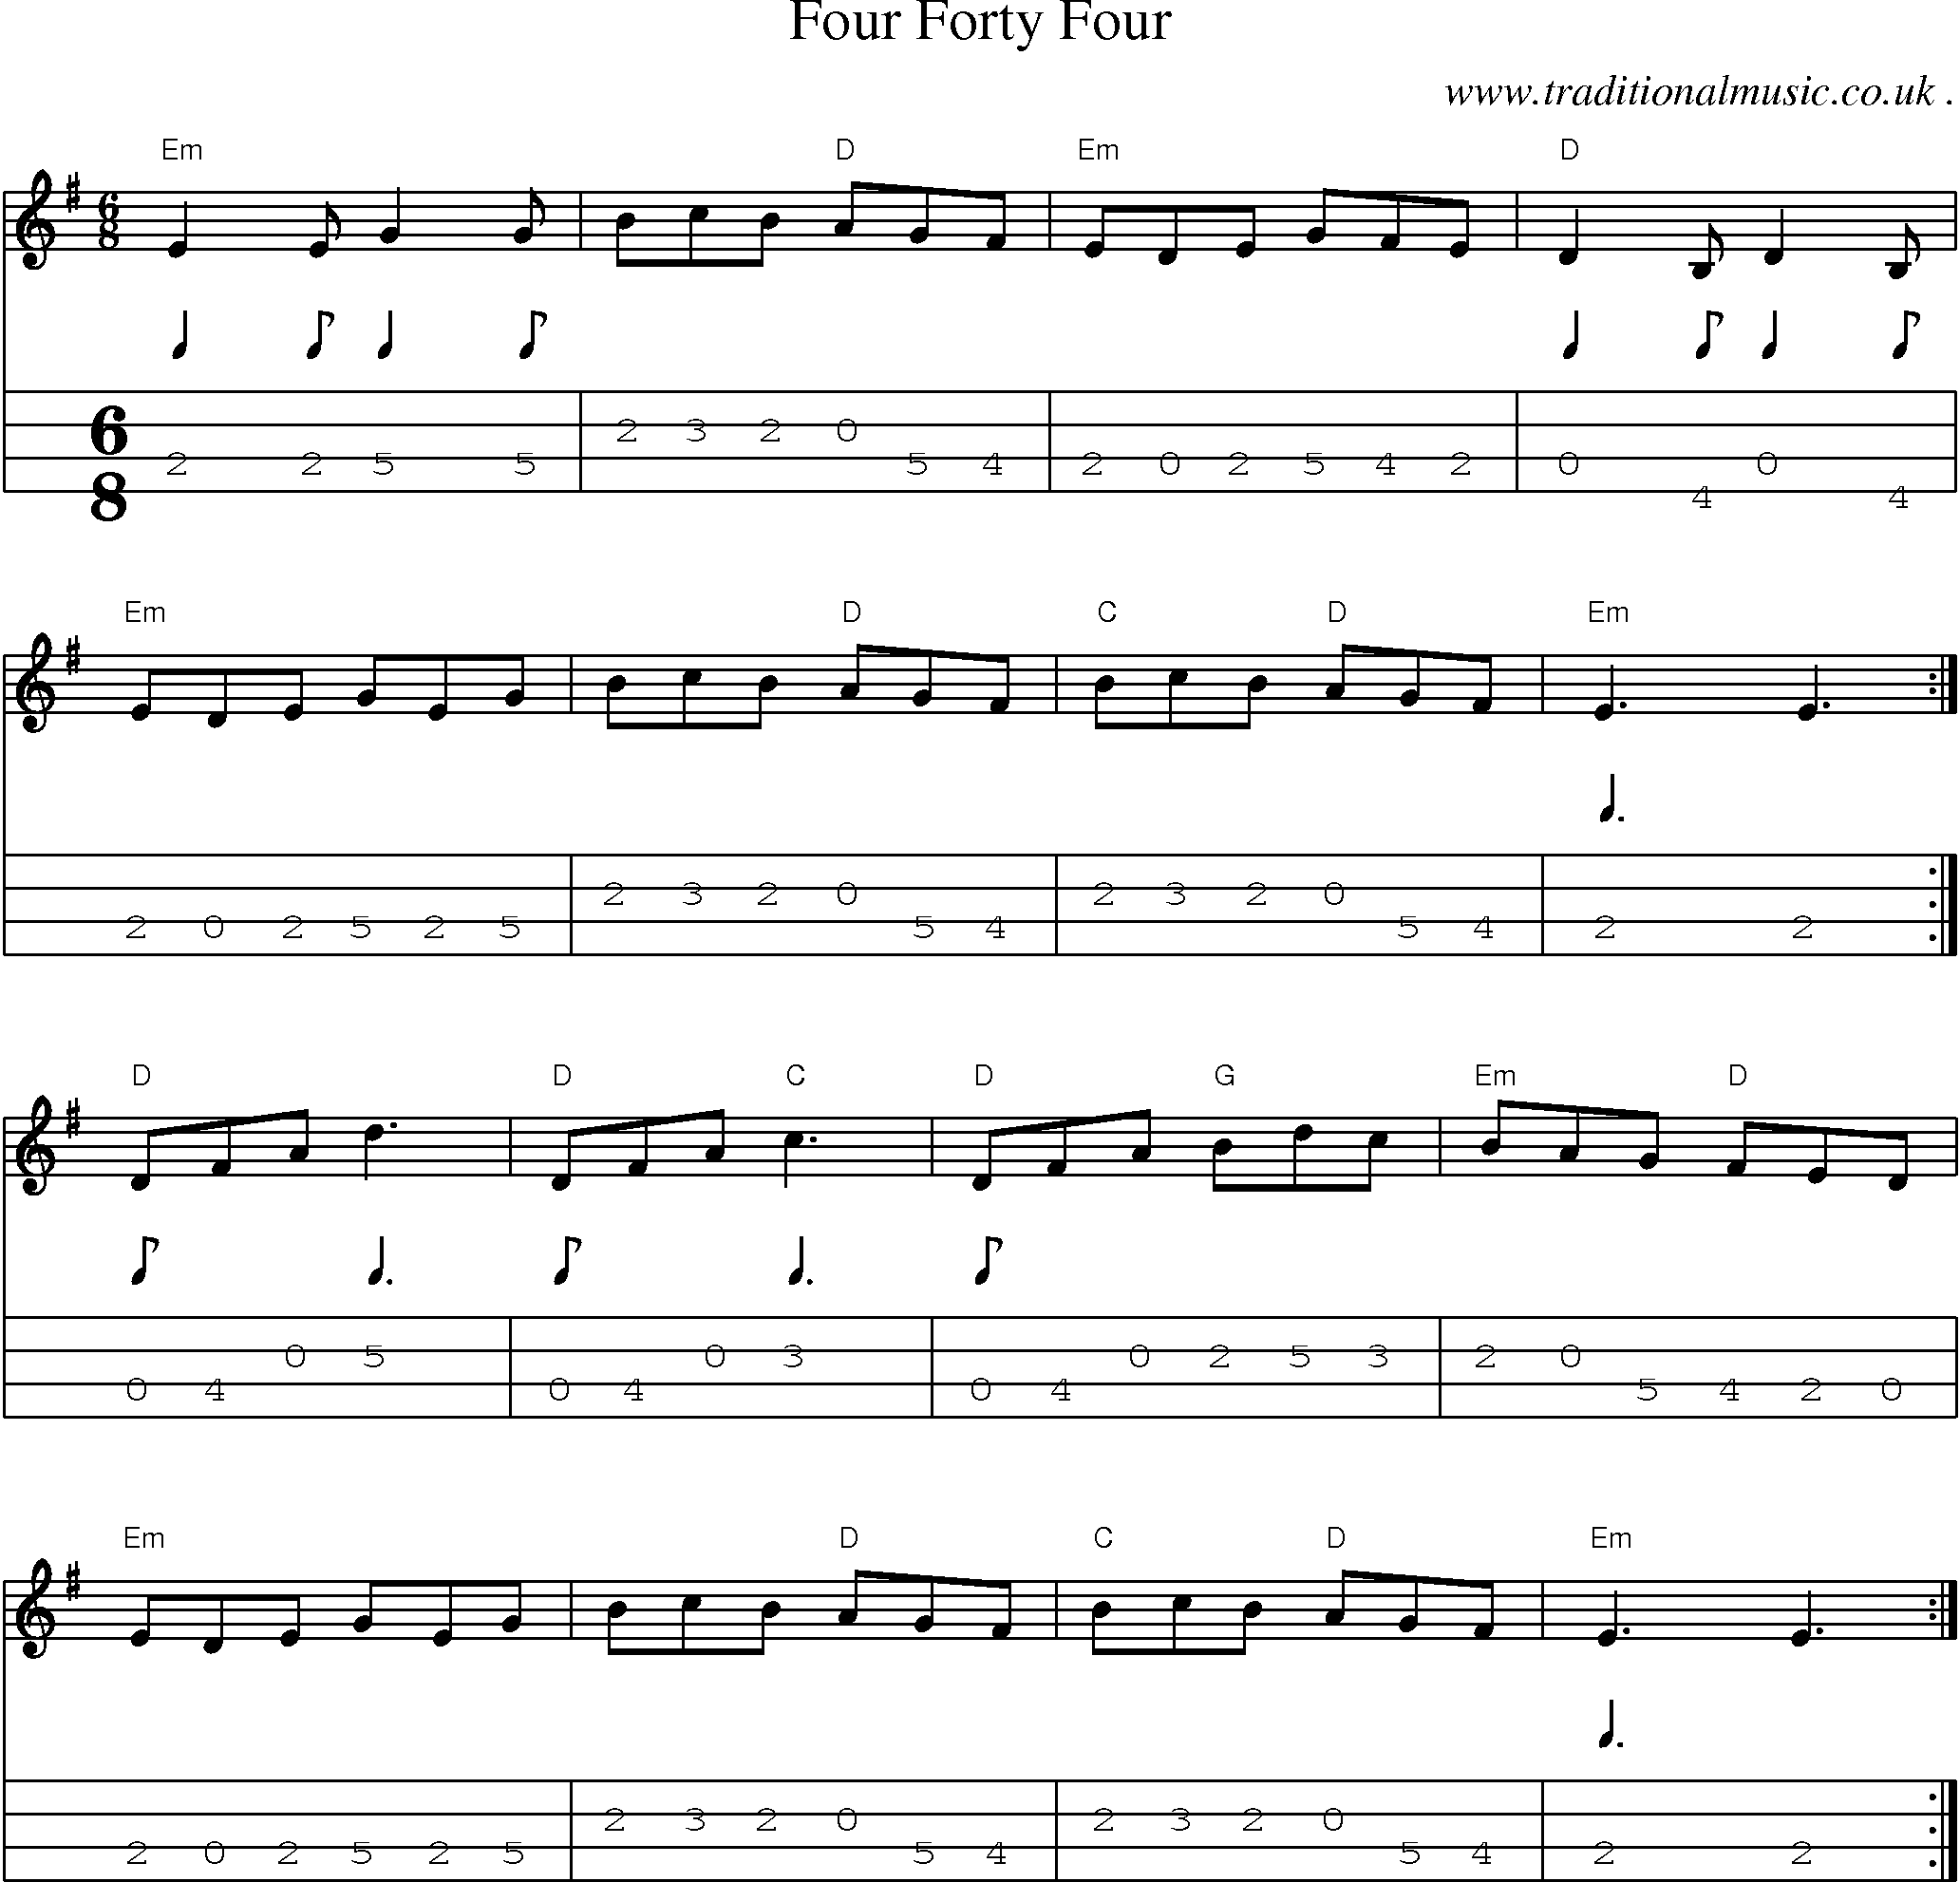 Music Score and Mandolin Tabs for Four Forty Four